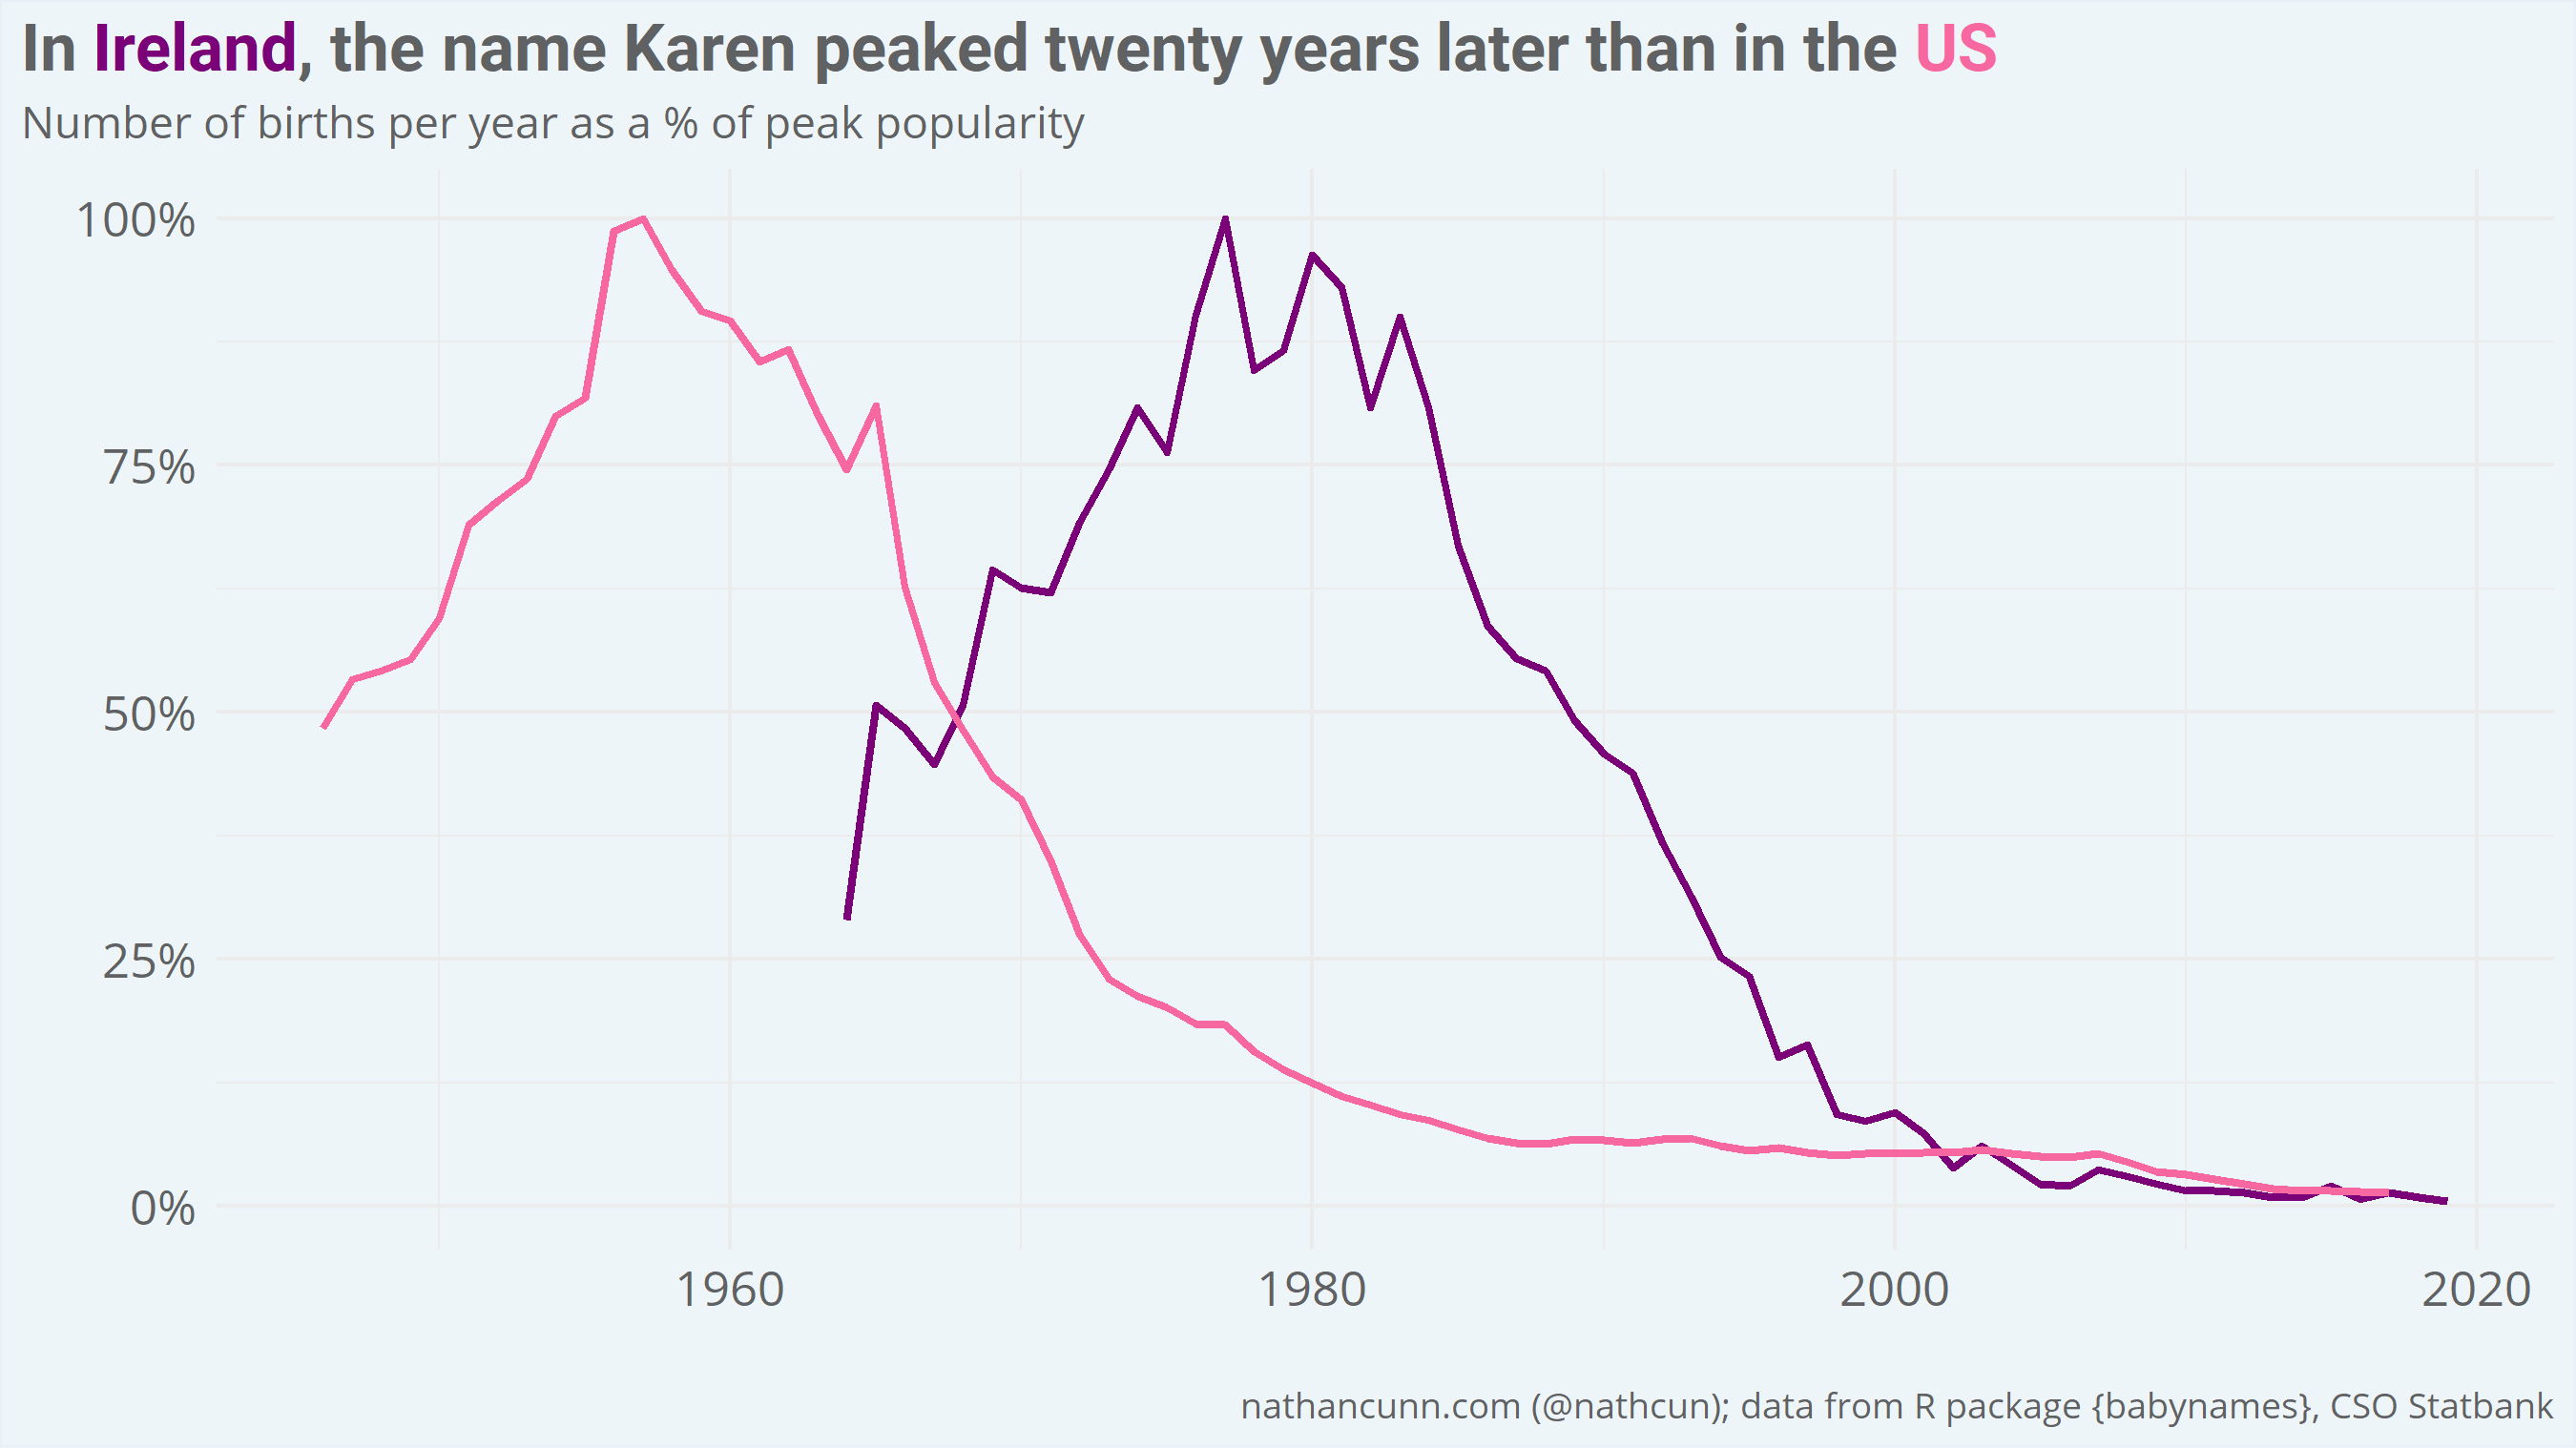 Line chart showing number of Karens born in US vs Ireland. Shows a peak in popularity in the US in the late 1950s, and peak in Ireland in the late 1970s.